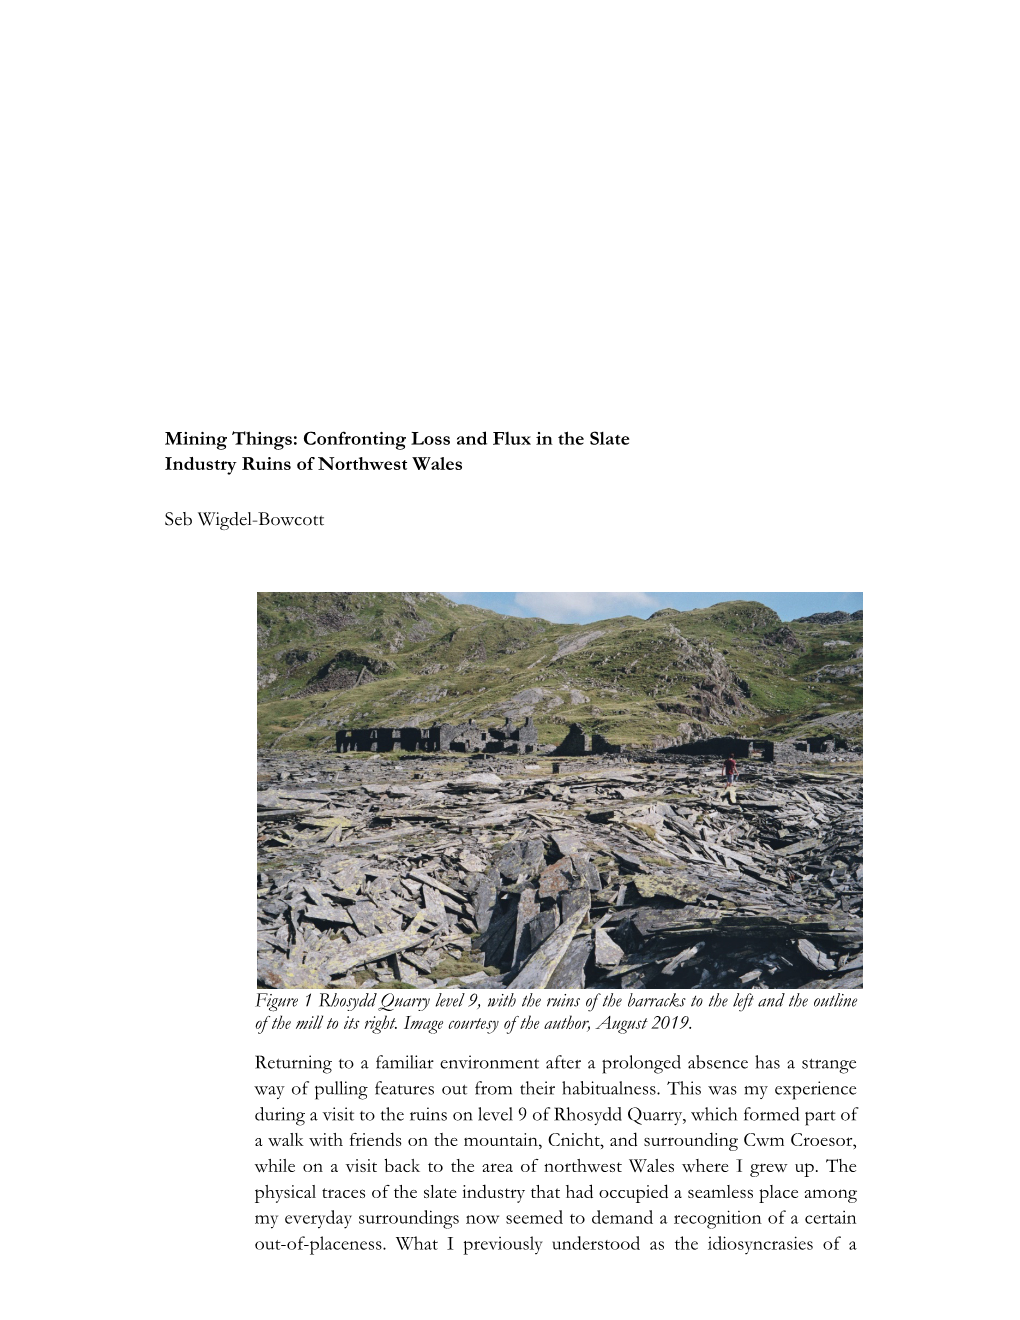 Confronting Loss and Flux in the Slate Industry Ruins of Northwest Wales